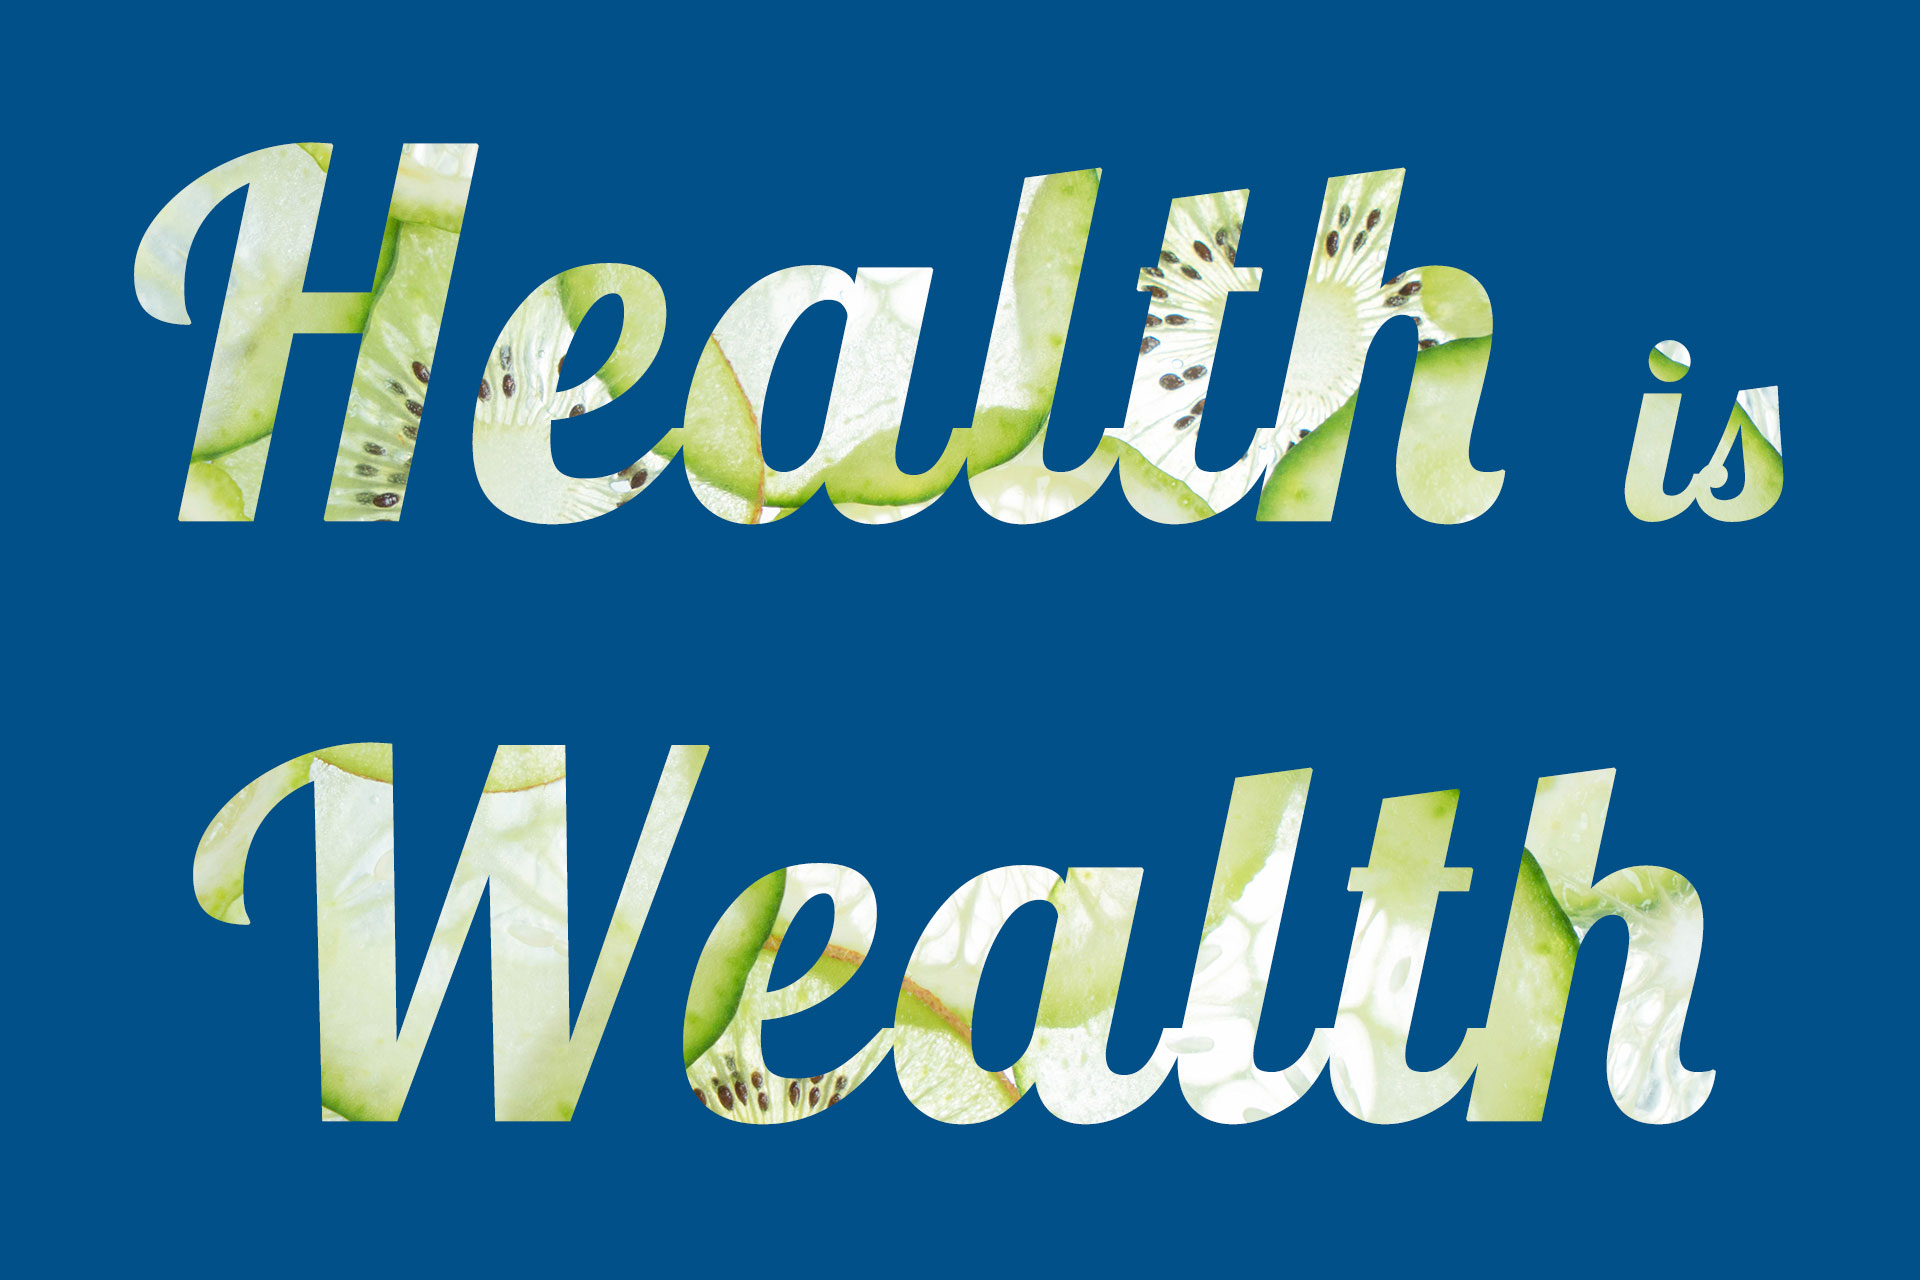 Health is Wealth written in fresh cucumber font - article title for Fish and Field Biokinetics Sandton and CapeTown